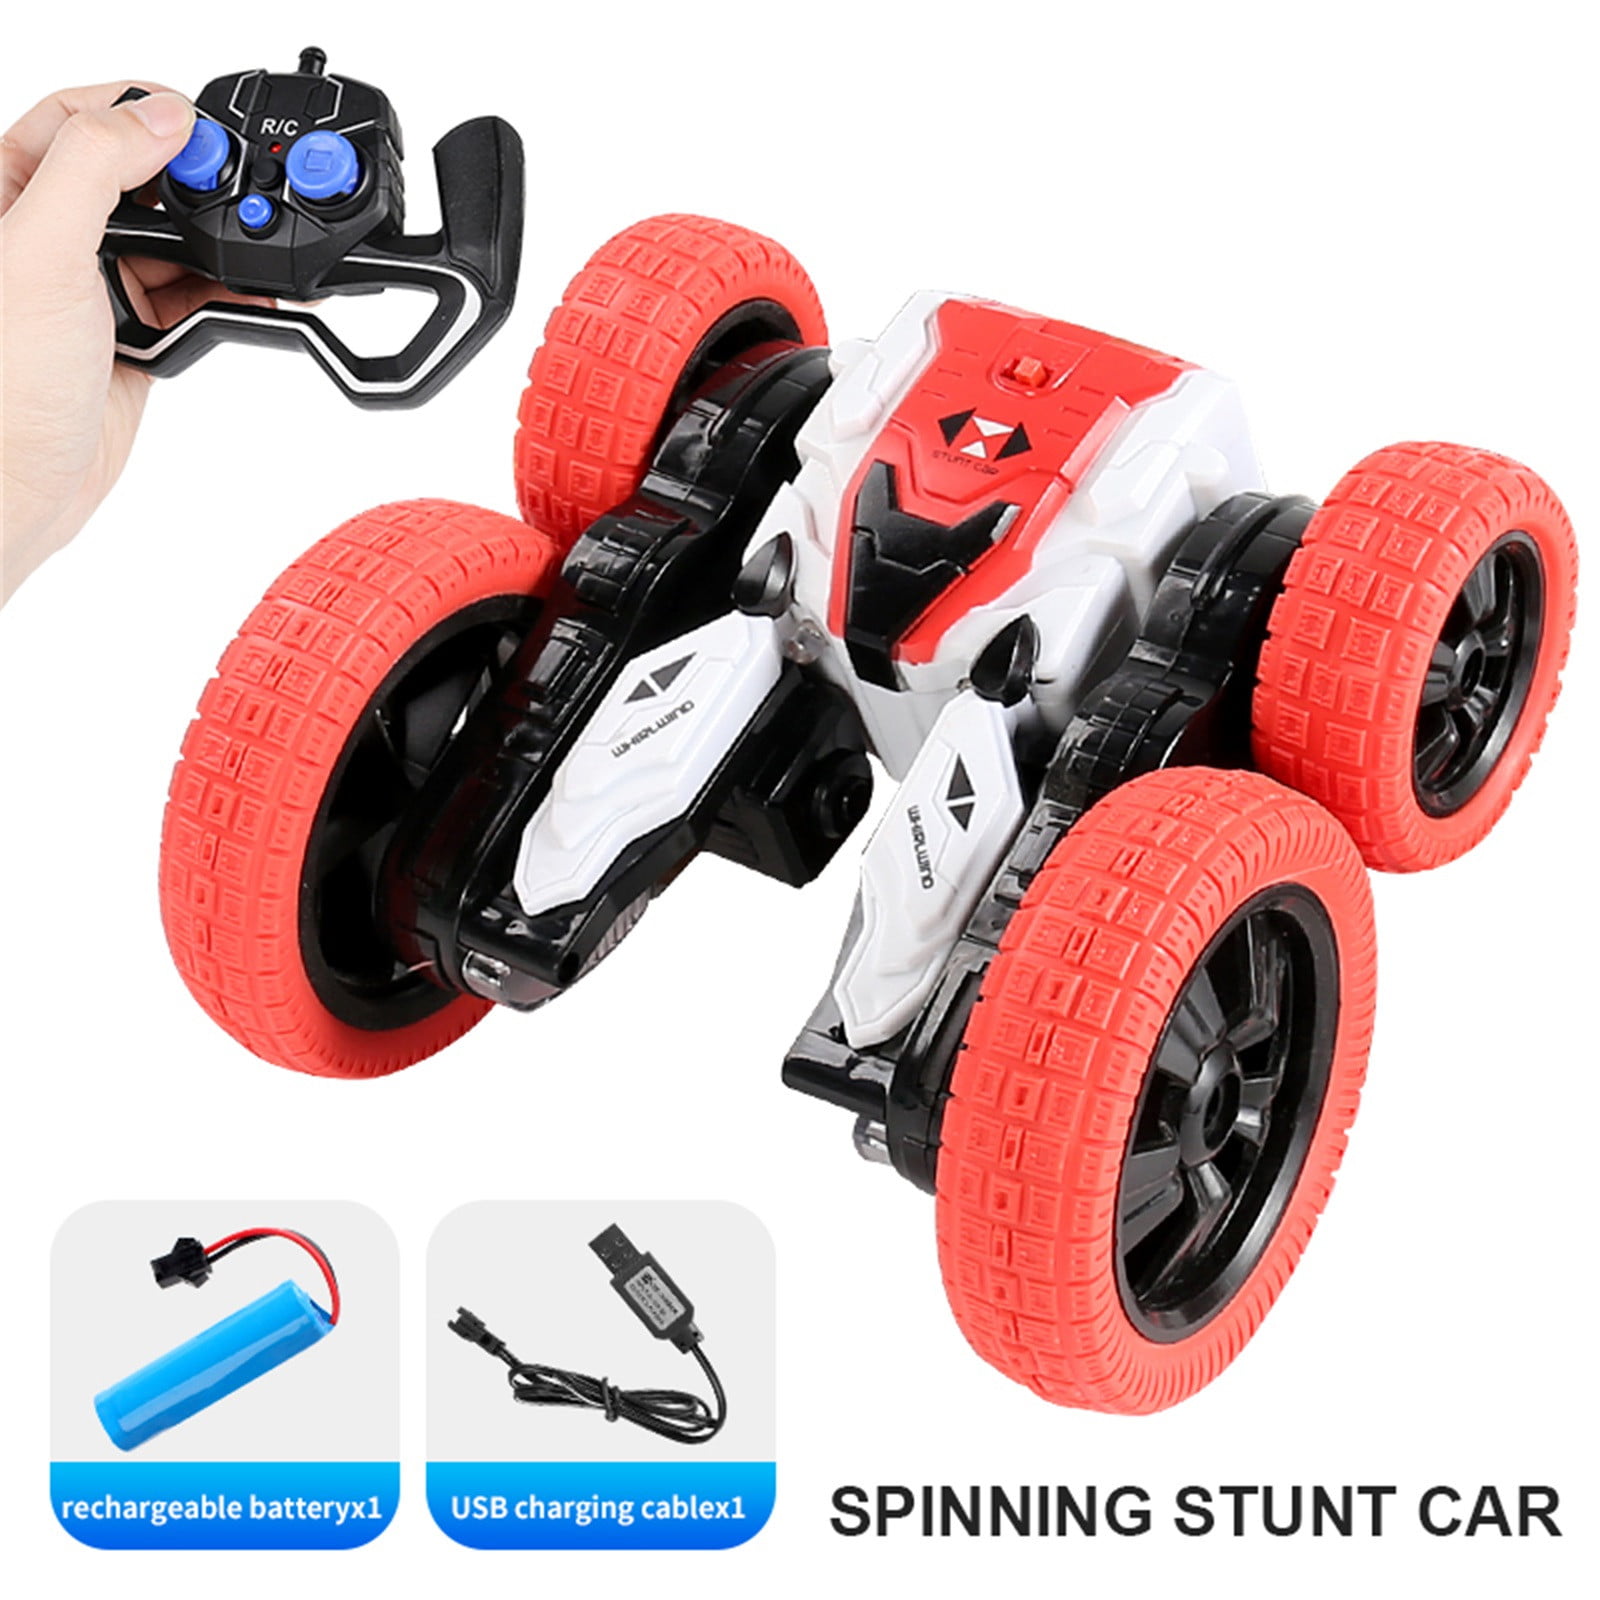 Green Threeking Rc Stunt Car Remote Control Off-Road Truck Double Sided Tumbling 360 Degree Rotation 3D Deformation Dance Car 1:28 2.4Ghz Rechargeable Stunt Car Great Gift for Kids 